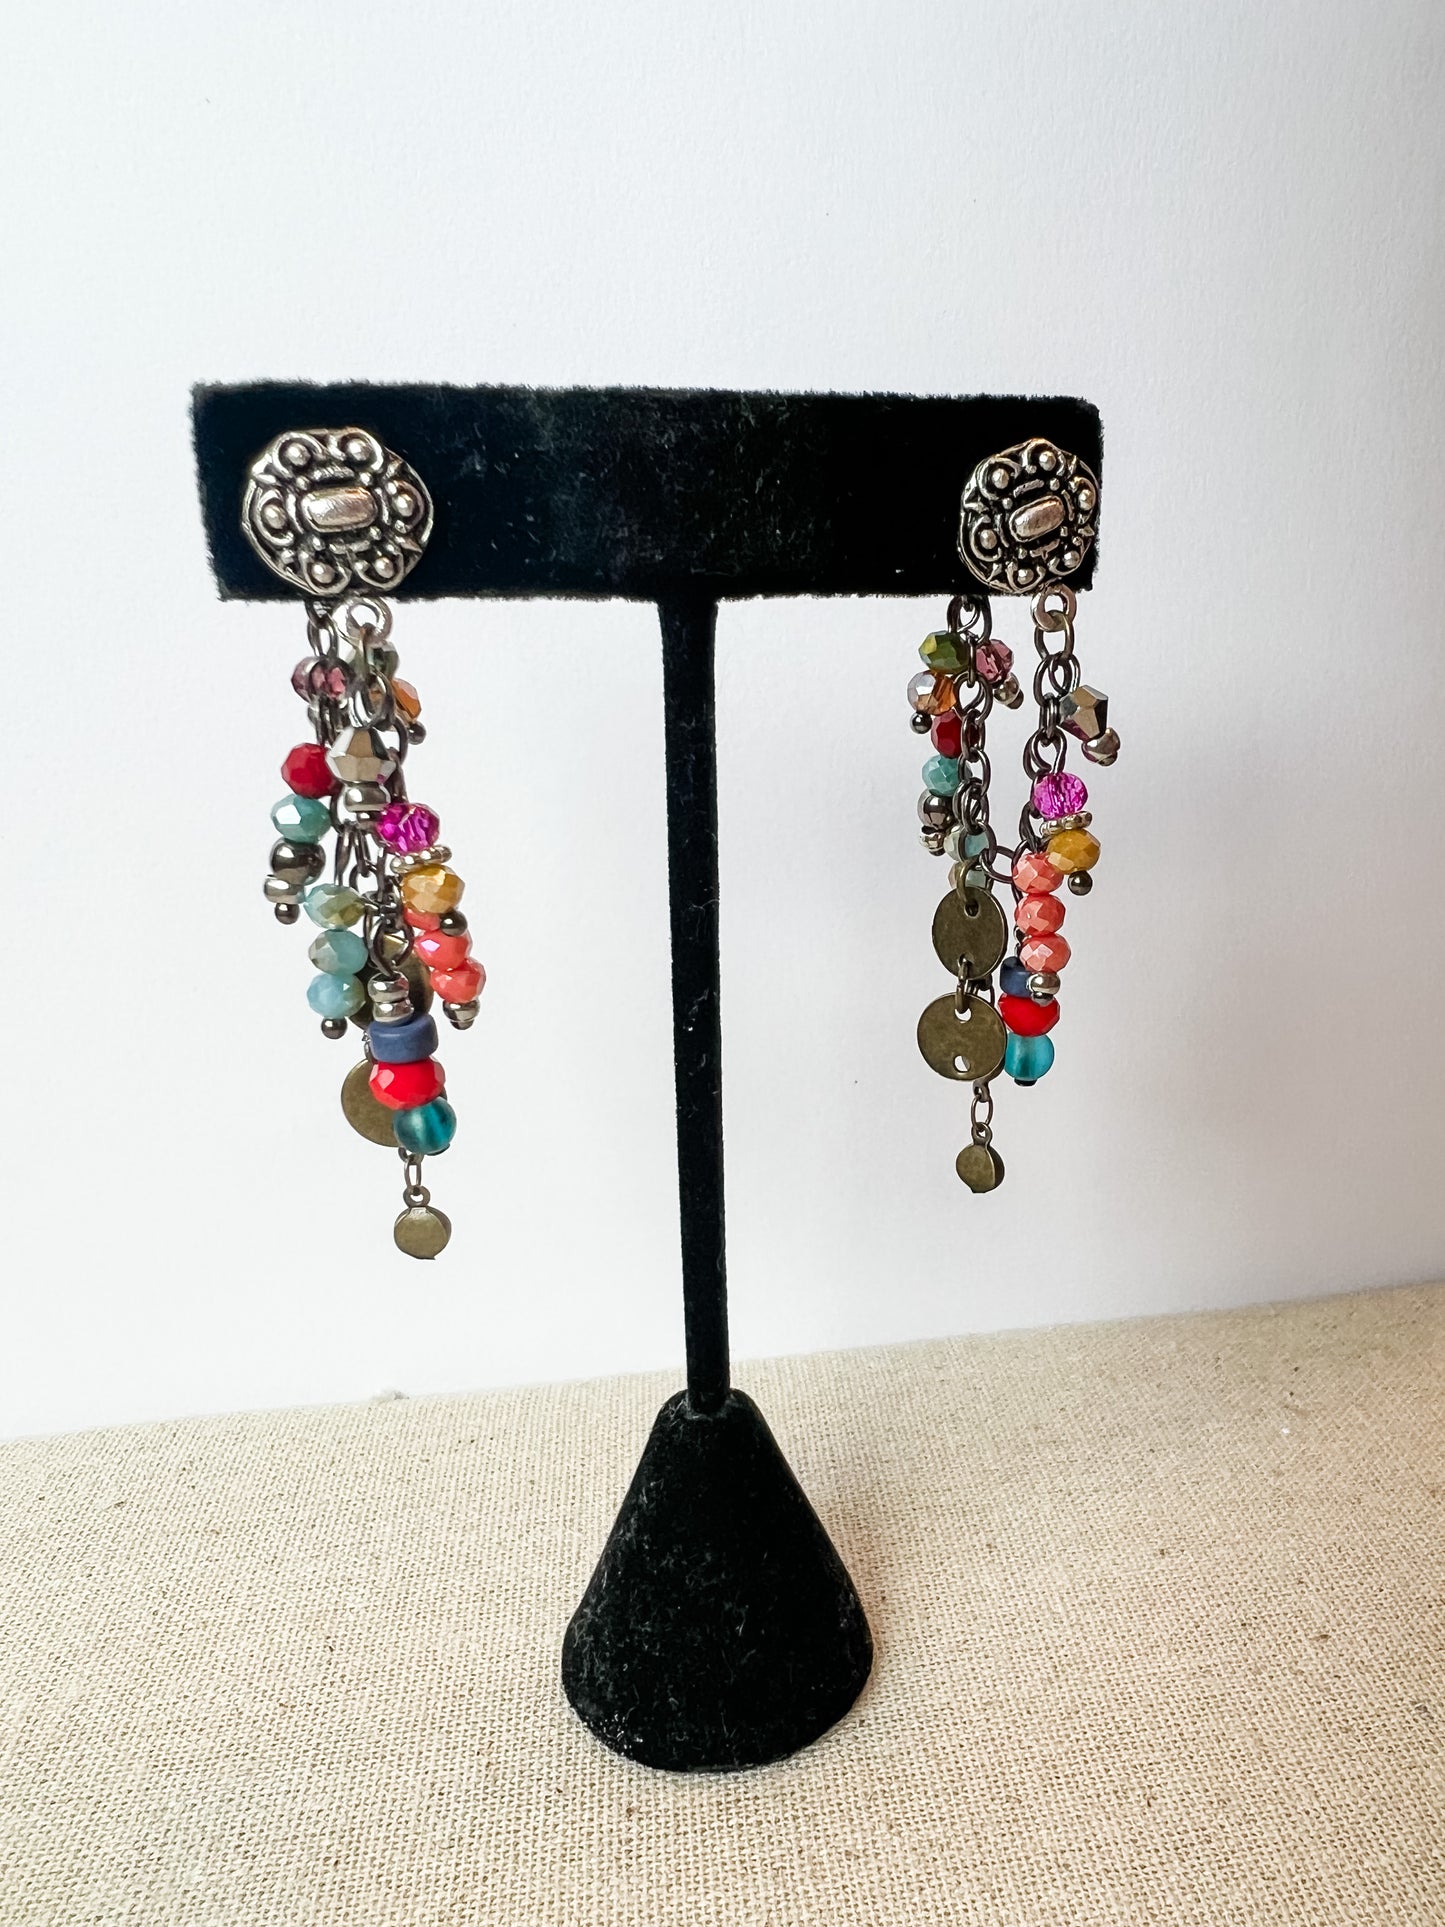 Unique Attatched Back Earrings